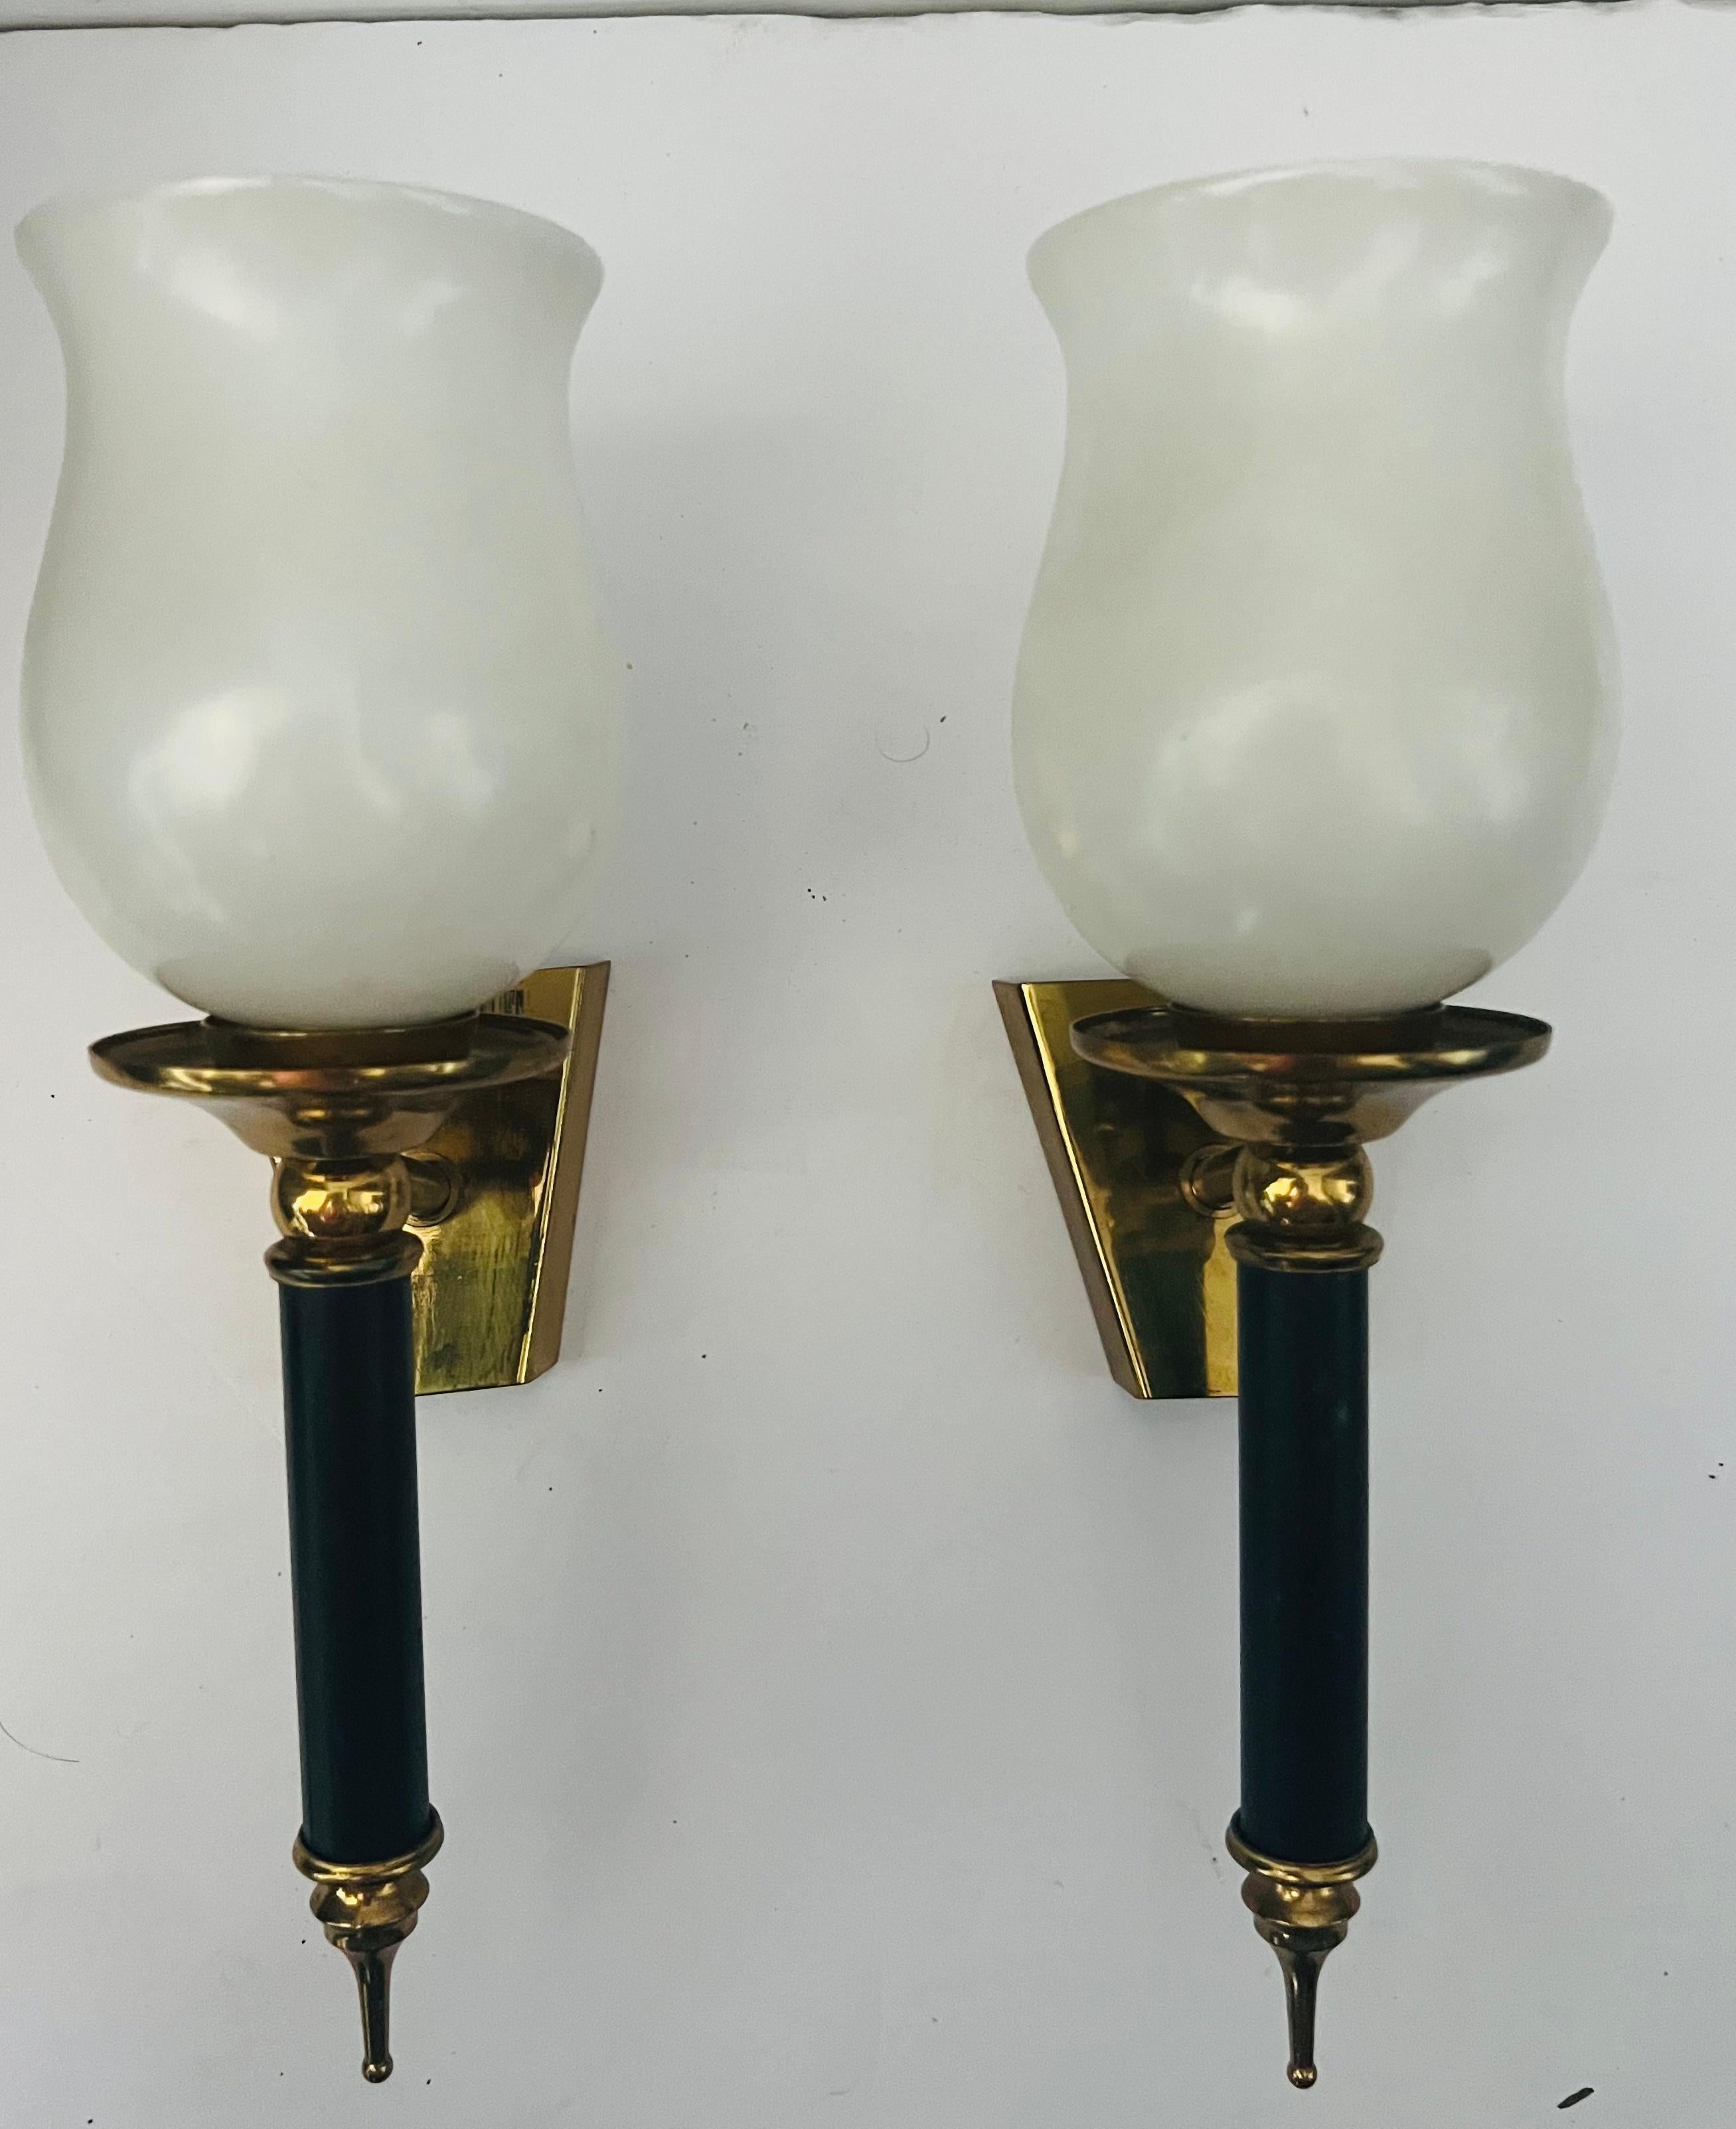 A wonderful pair of a French 1950s Regency wall
Sconces with brass and black enamel fixtures holding white tulip glass shades. Newly rewired.